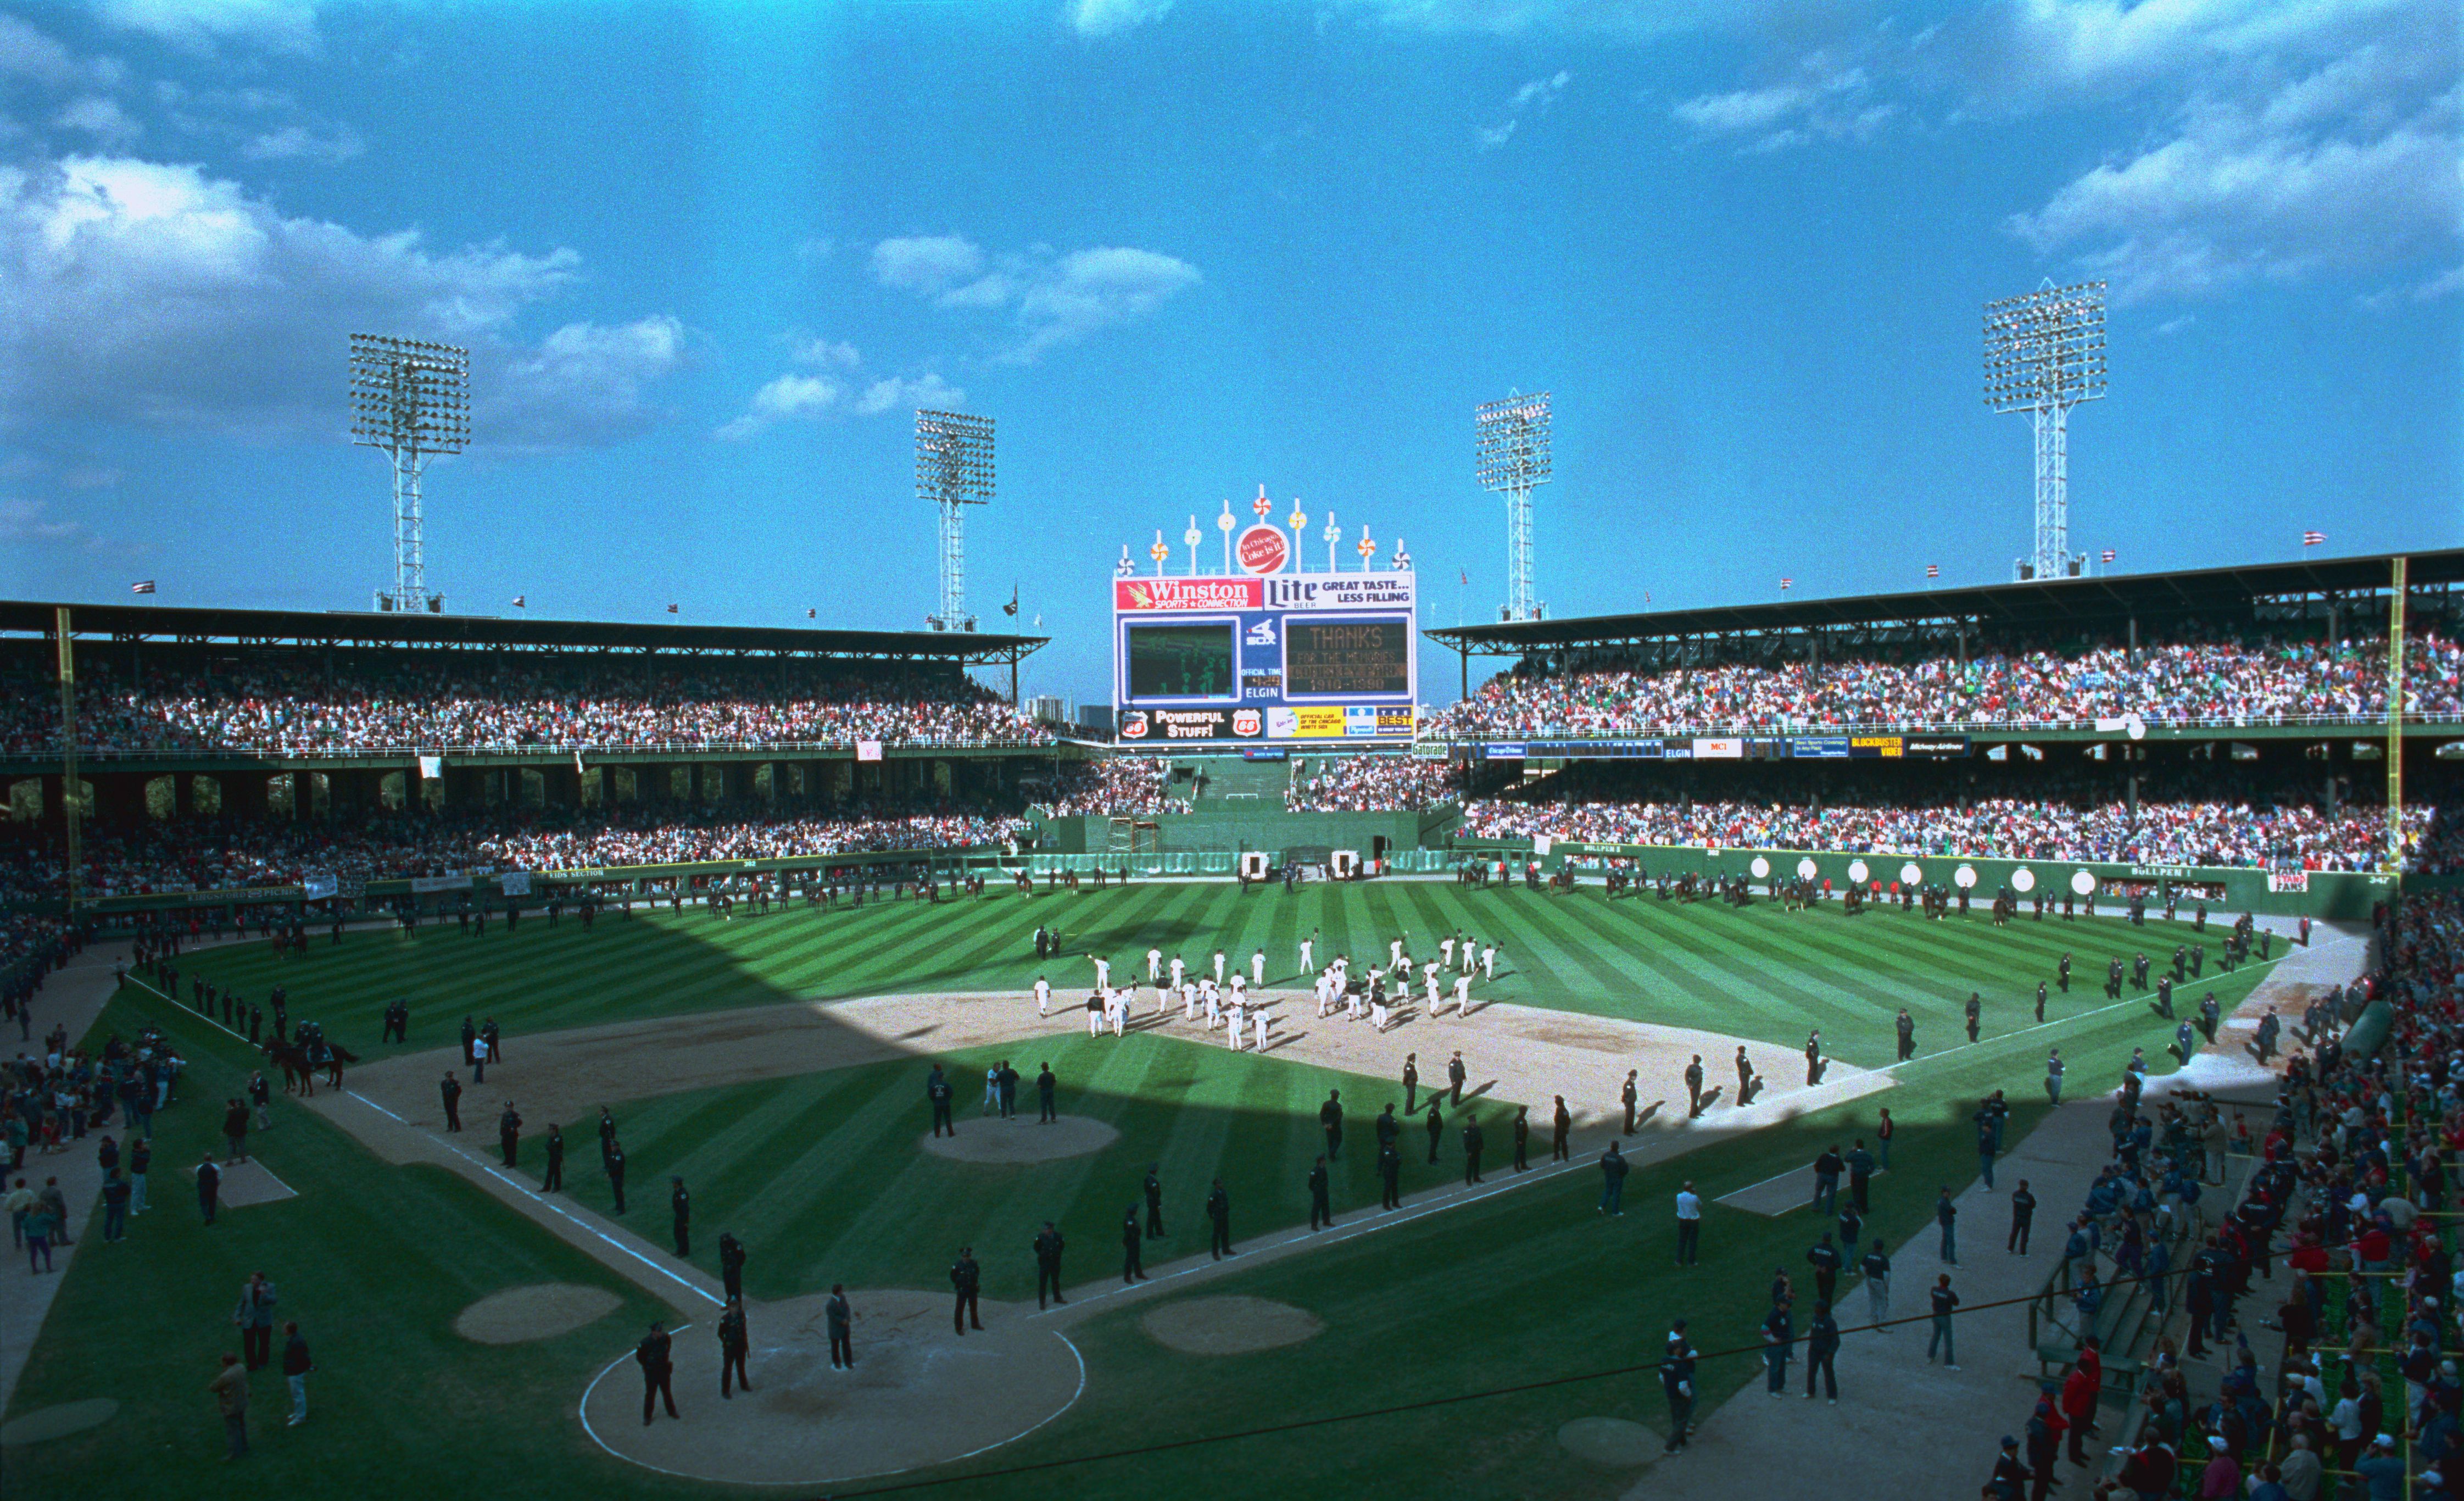 Northeast News, Comiskey Park, Home of the White Sox